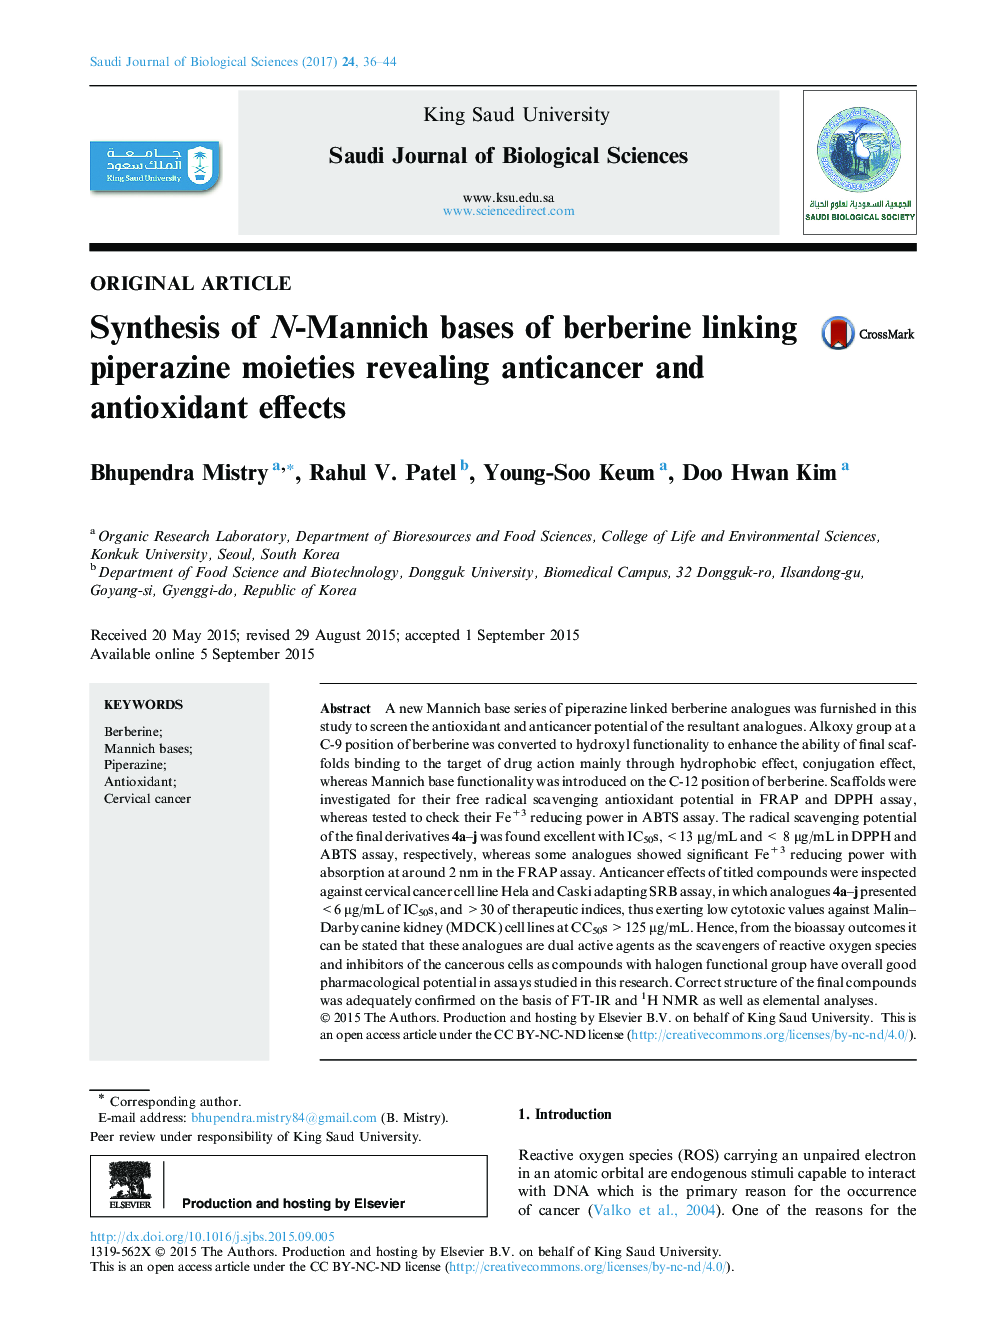 Original articleSynthesis of N-Mannich bases of berberine linking piperazine moieties revealing anticancer and antioxidant effects